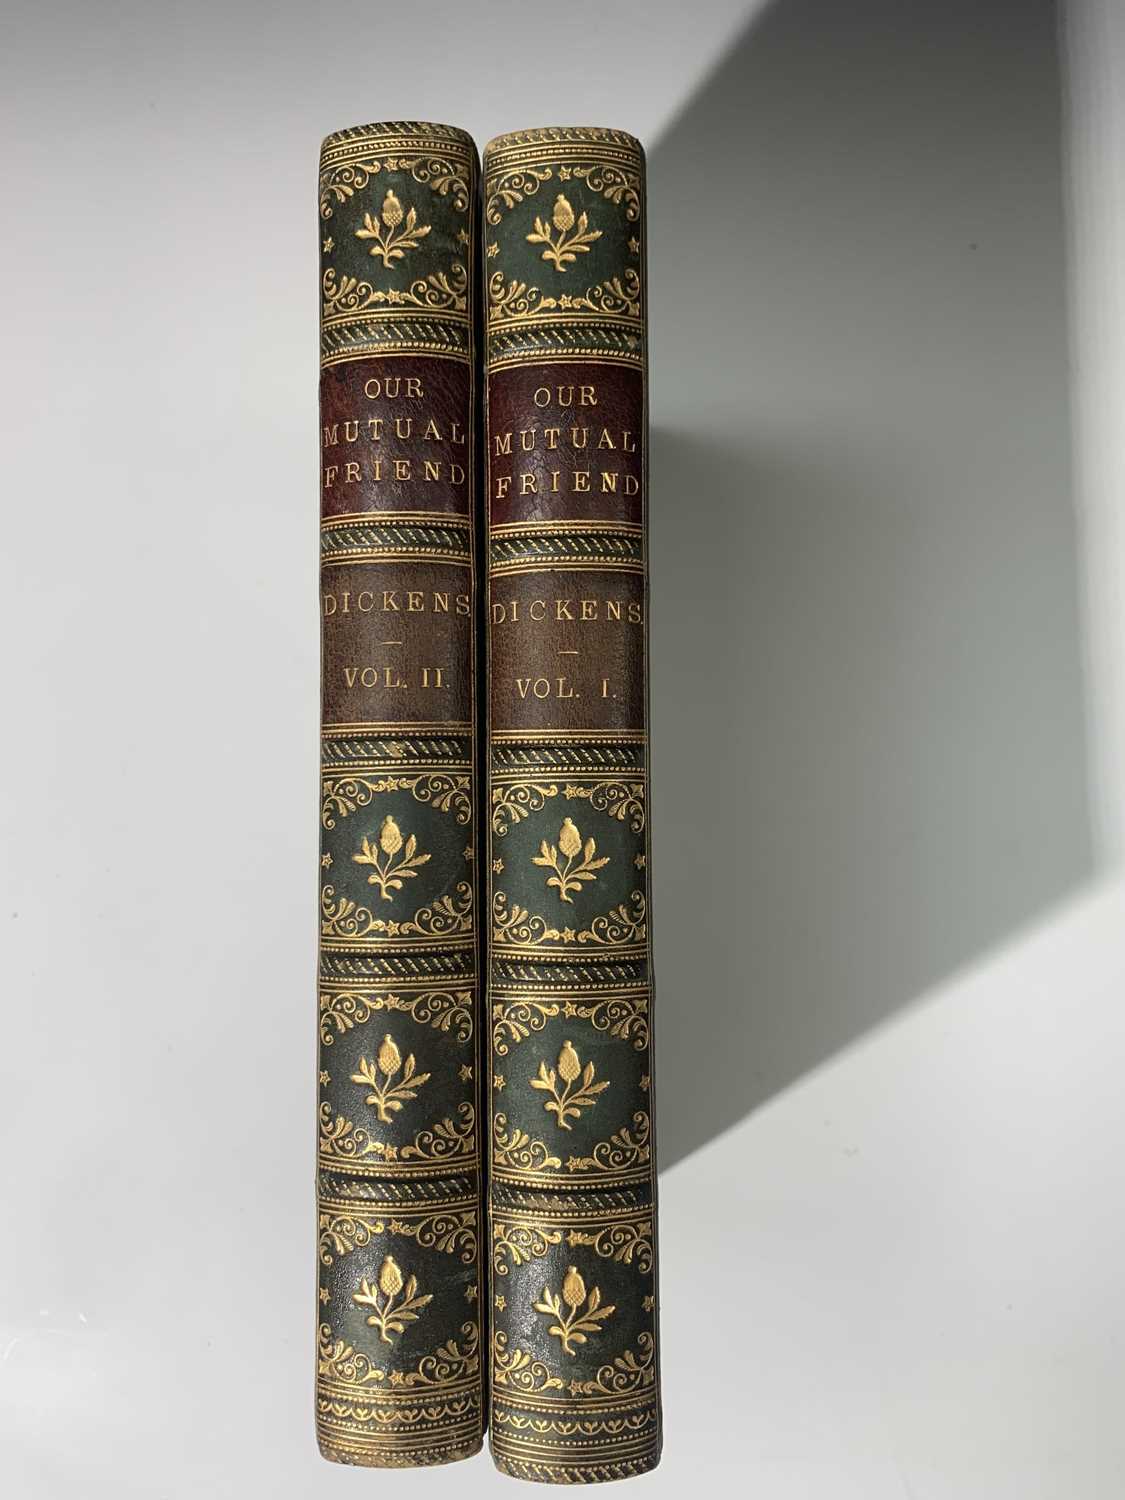 CHARLES DICKENS "Our Mutual Friend." 2 Vols, 1st edition, etched plates by Marcus Stone complete, - Image 9 of 9